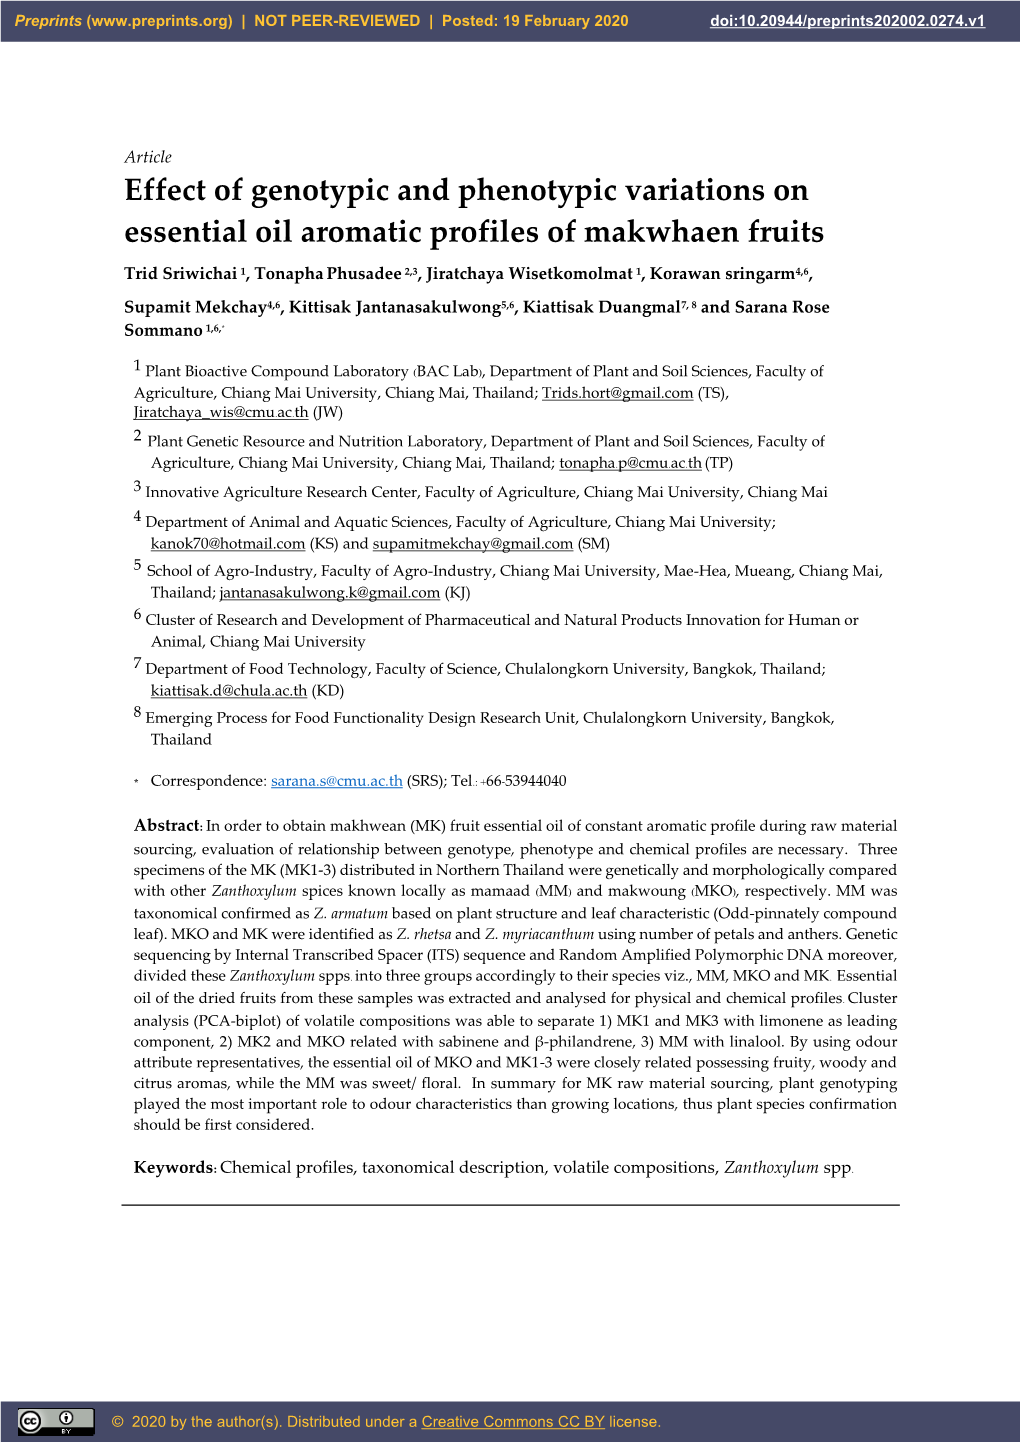 Effect of Genotypic and Phenotypic Variations on Essential Oil Aromatic Profiles of Makwhaen Fruits